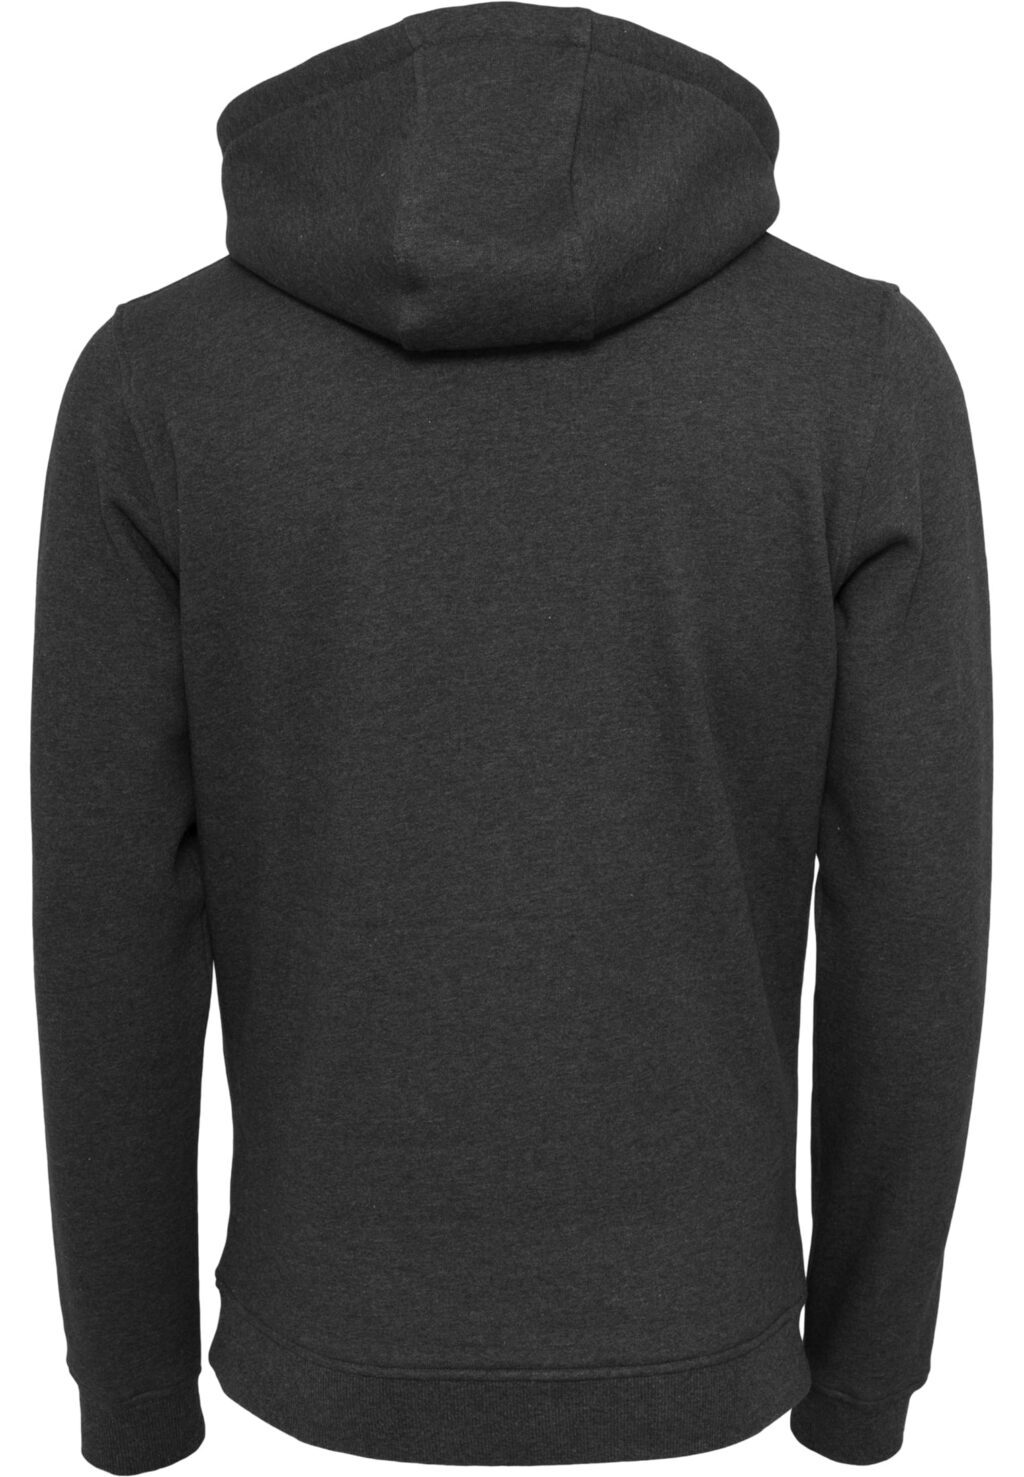 Lost Youth Rose Hoody charcoal MT2657